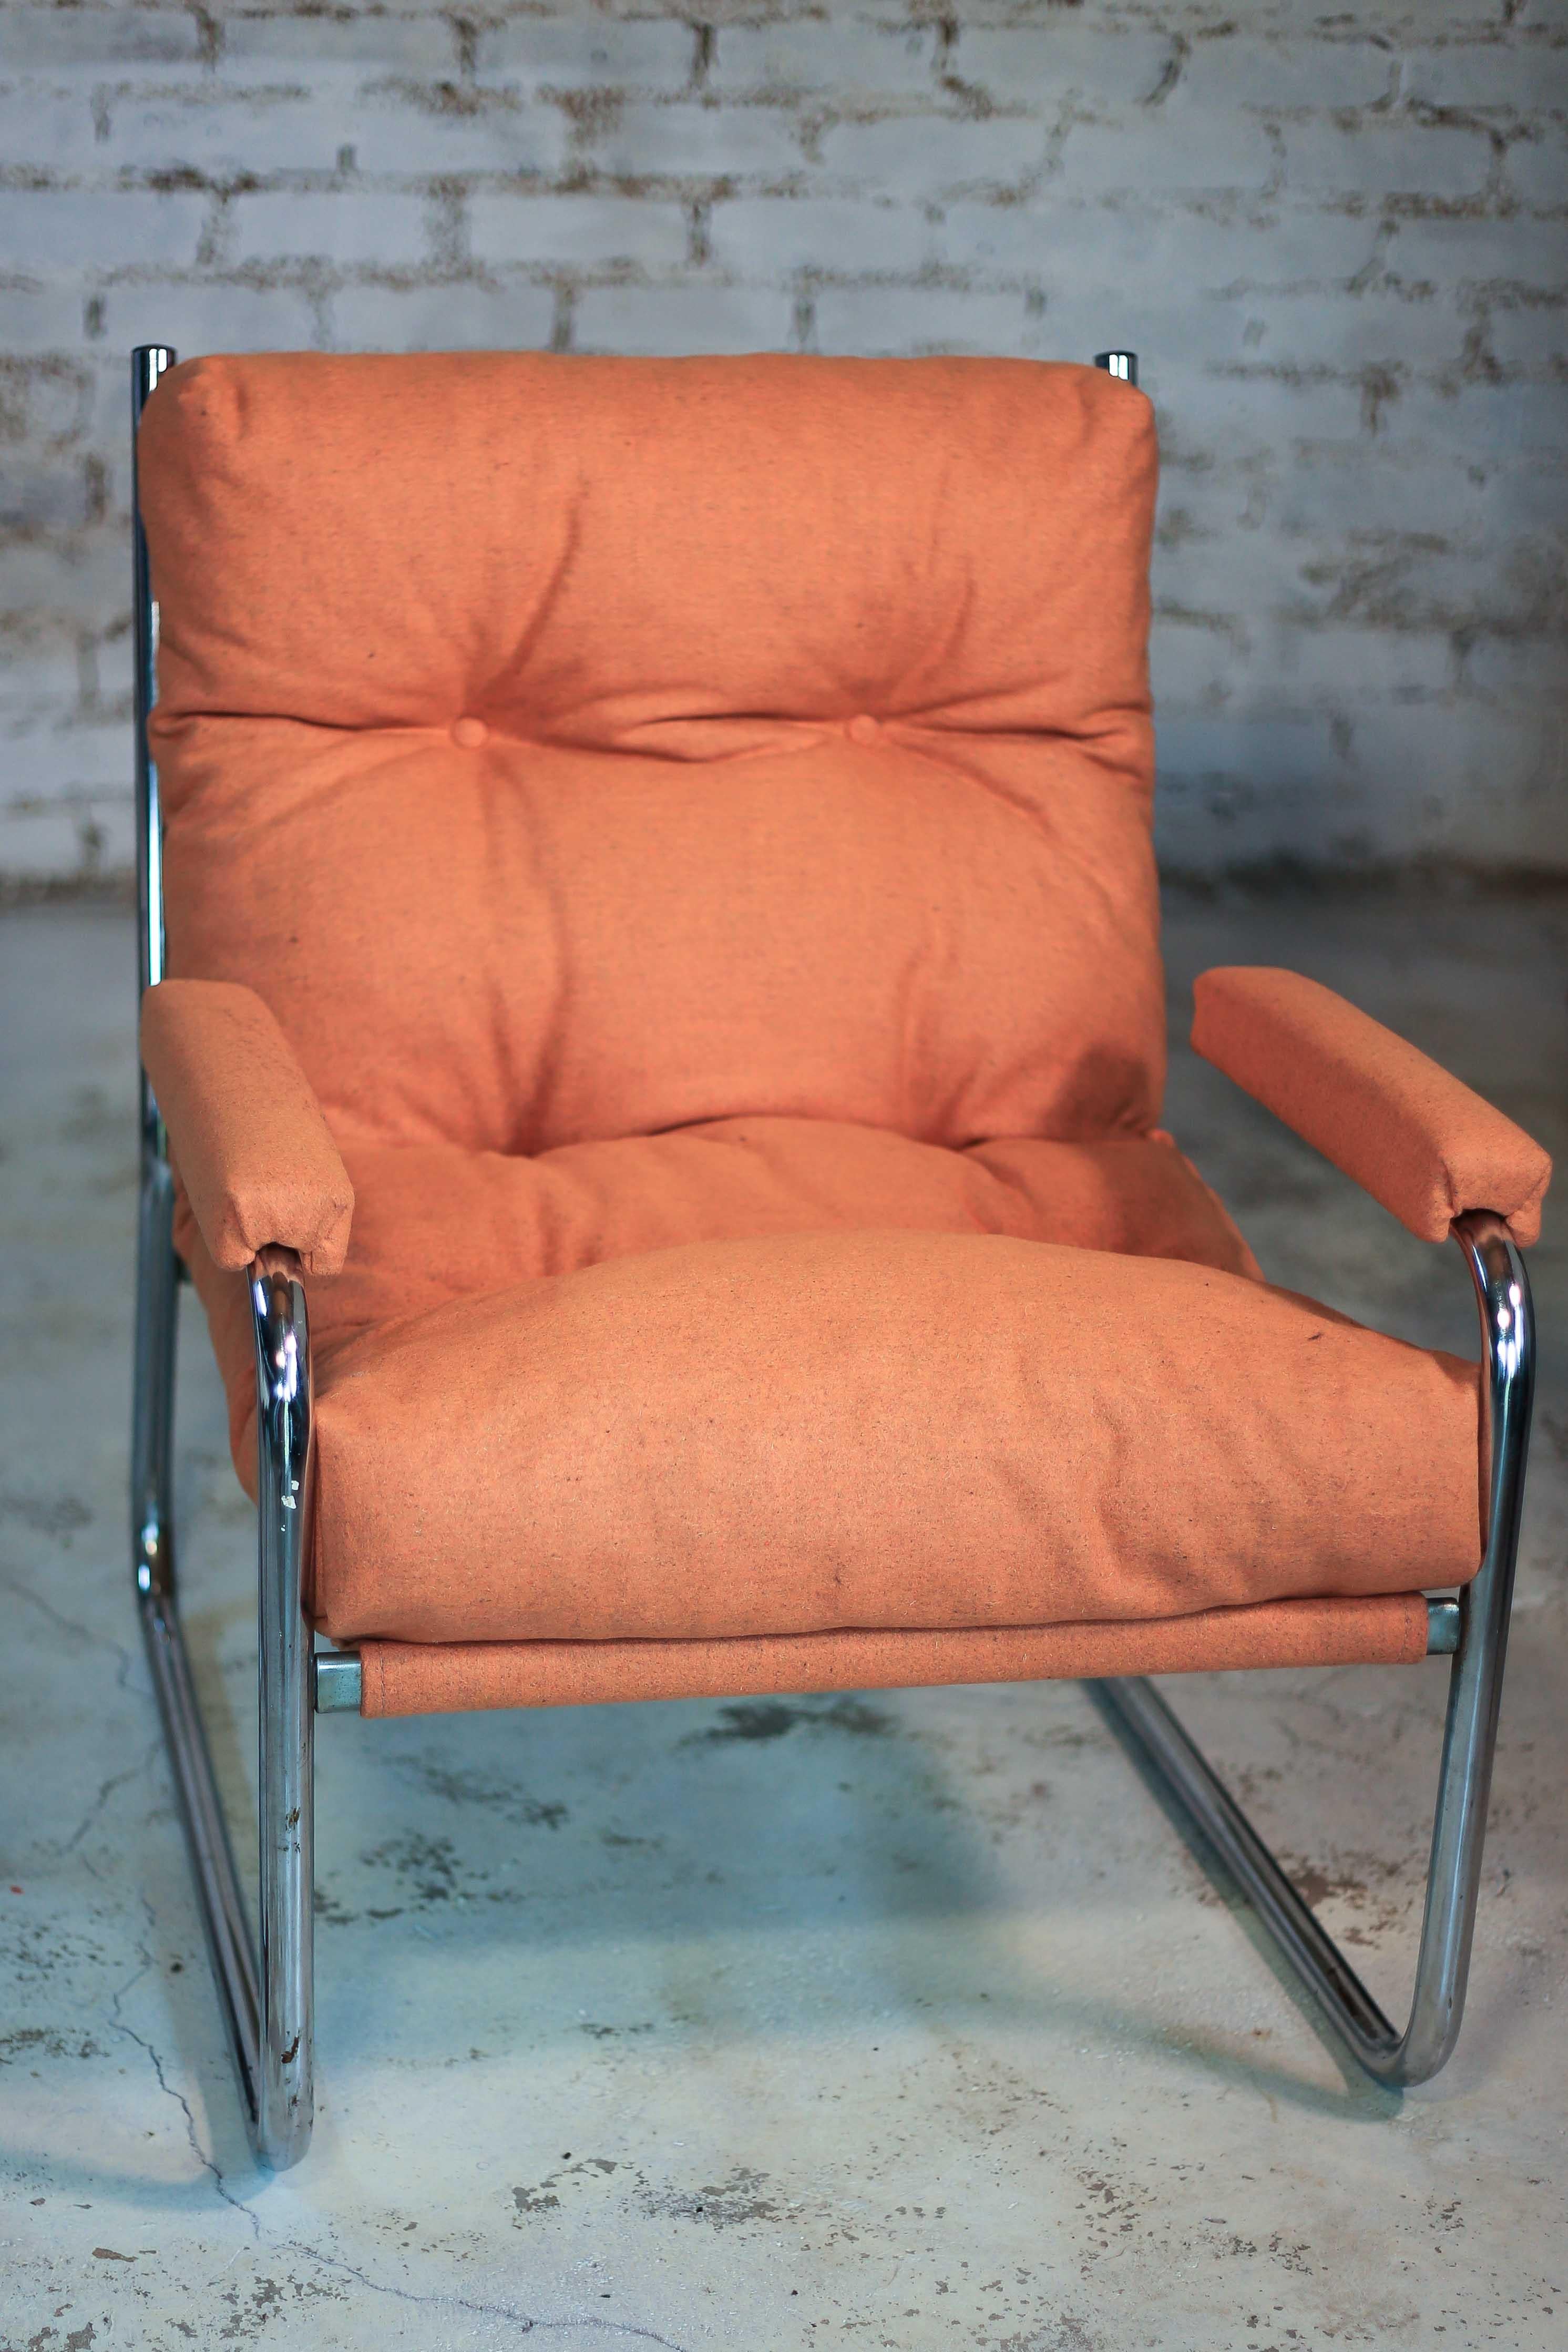 South African Pair of 1970s Bauhaus Style Tubular Steel Cantilever Sling Chairs - in stock For Sale